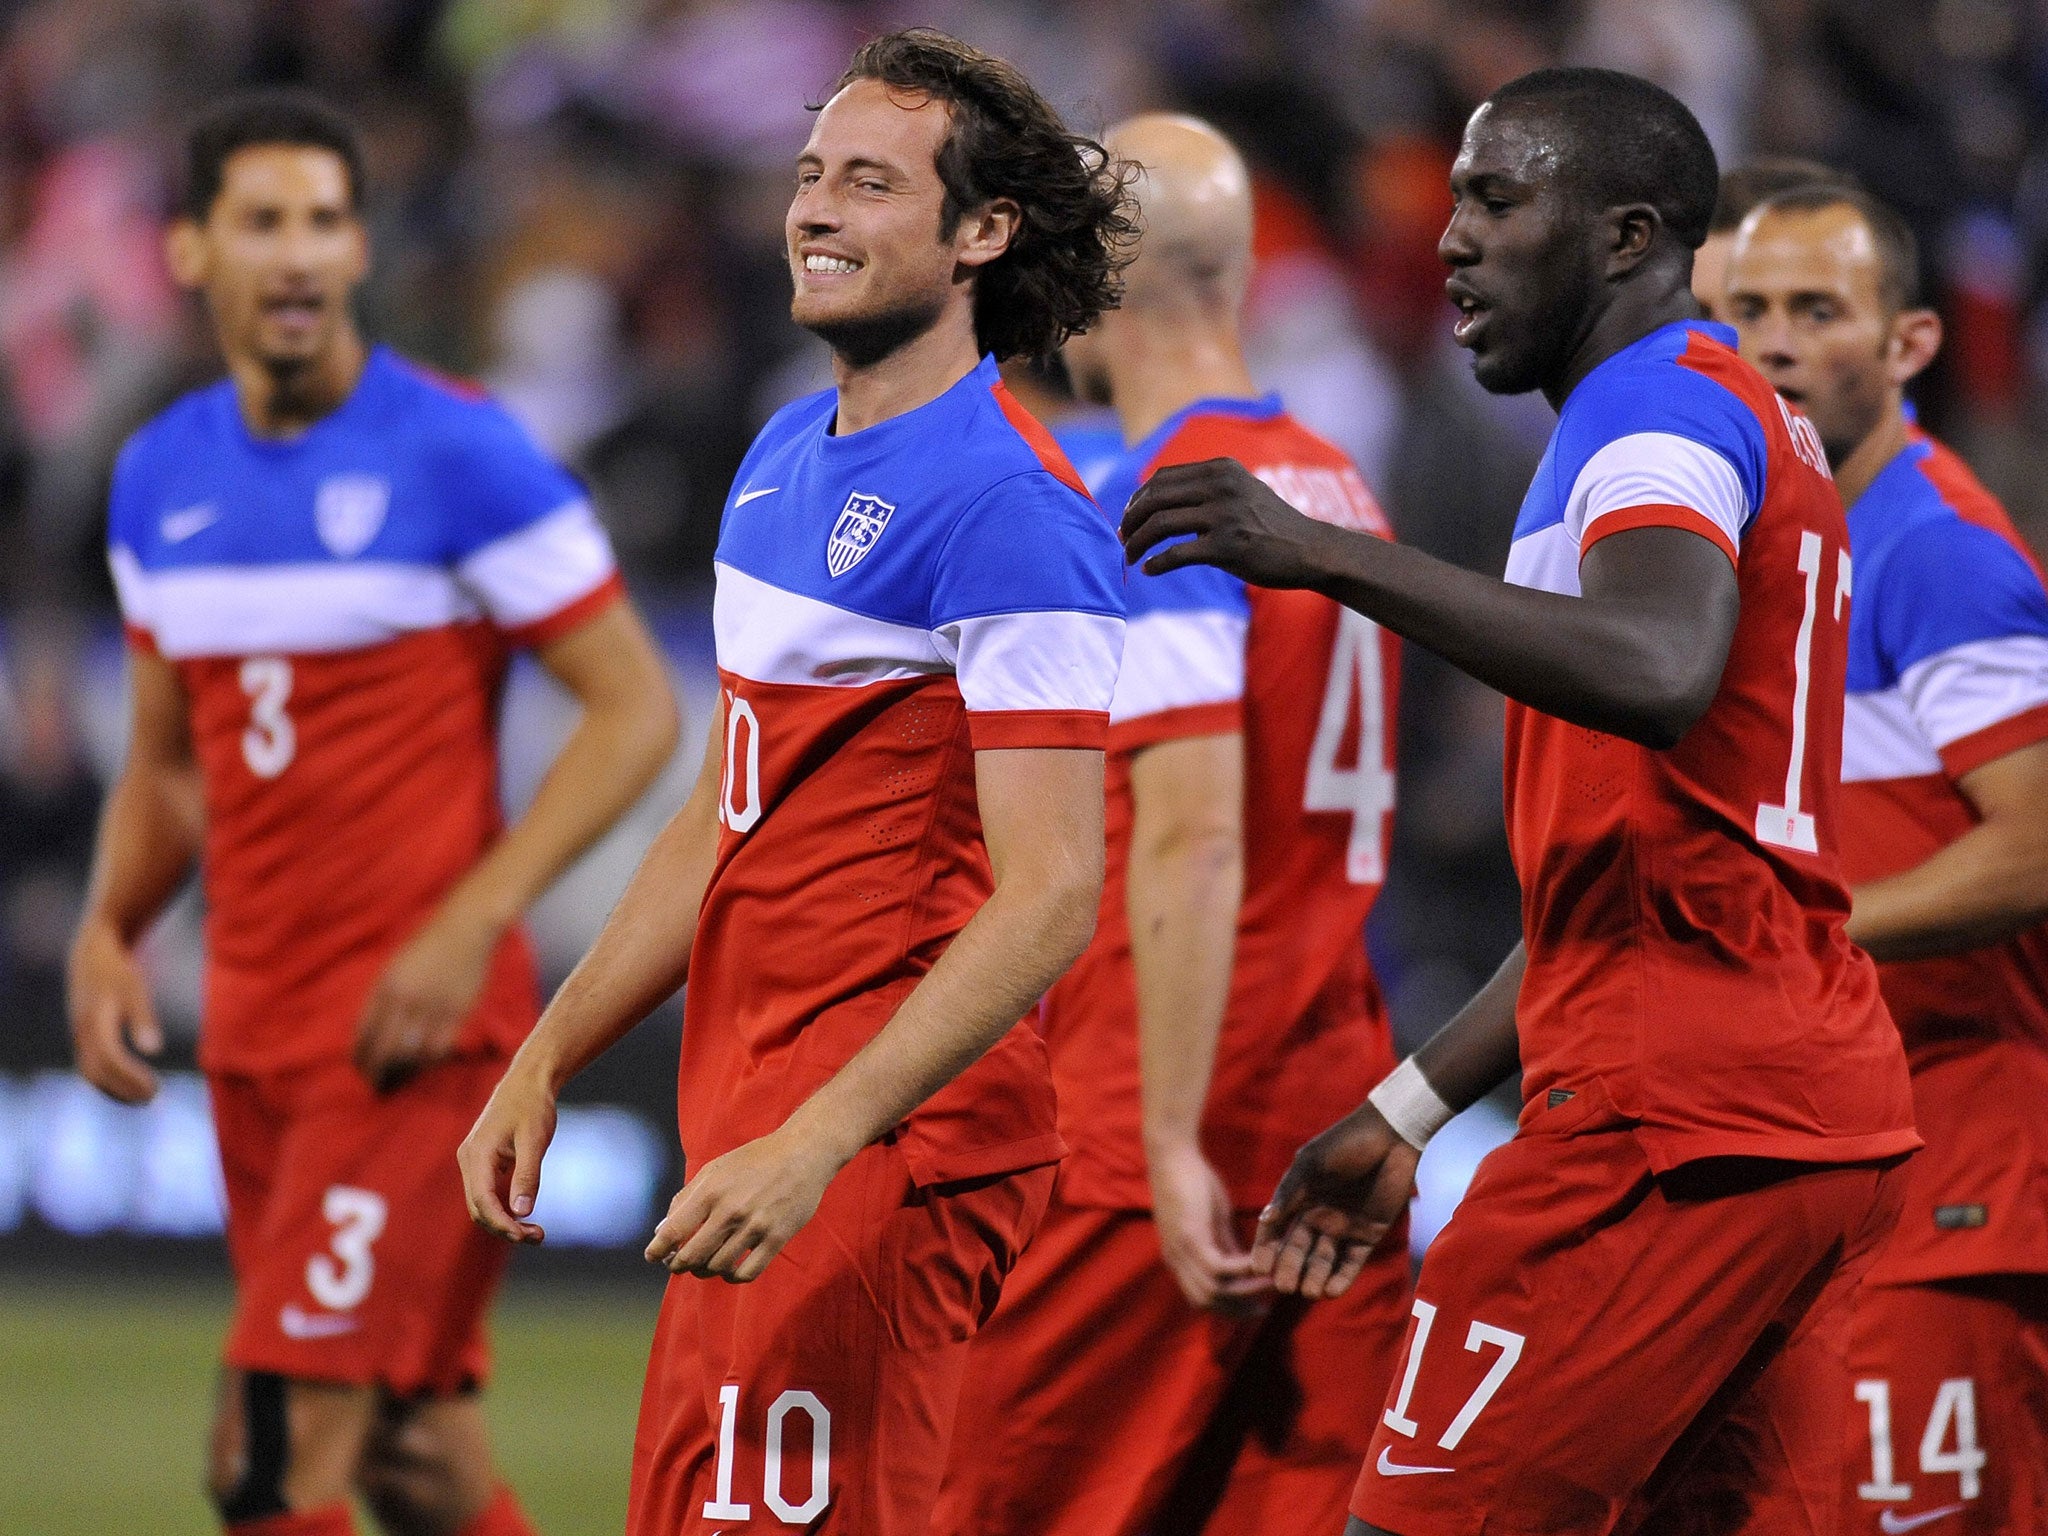 States side: The USA team has qualified for its seventh consecutive World Cup finals